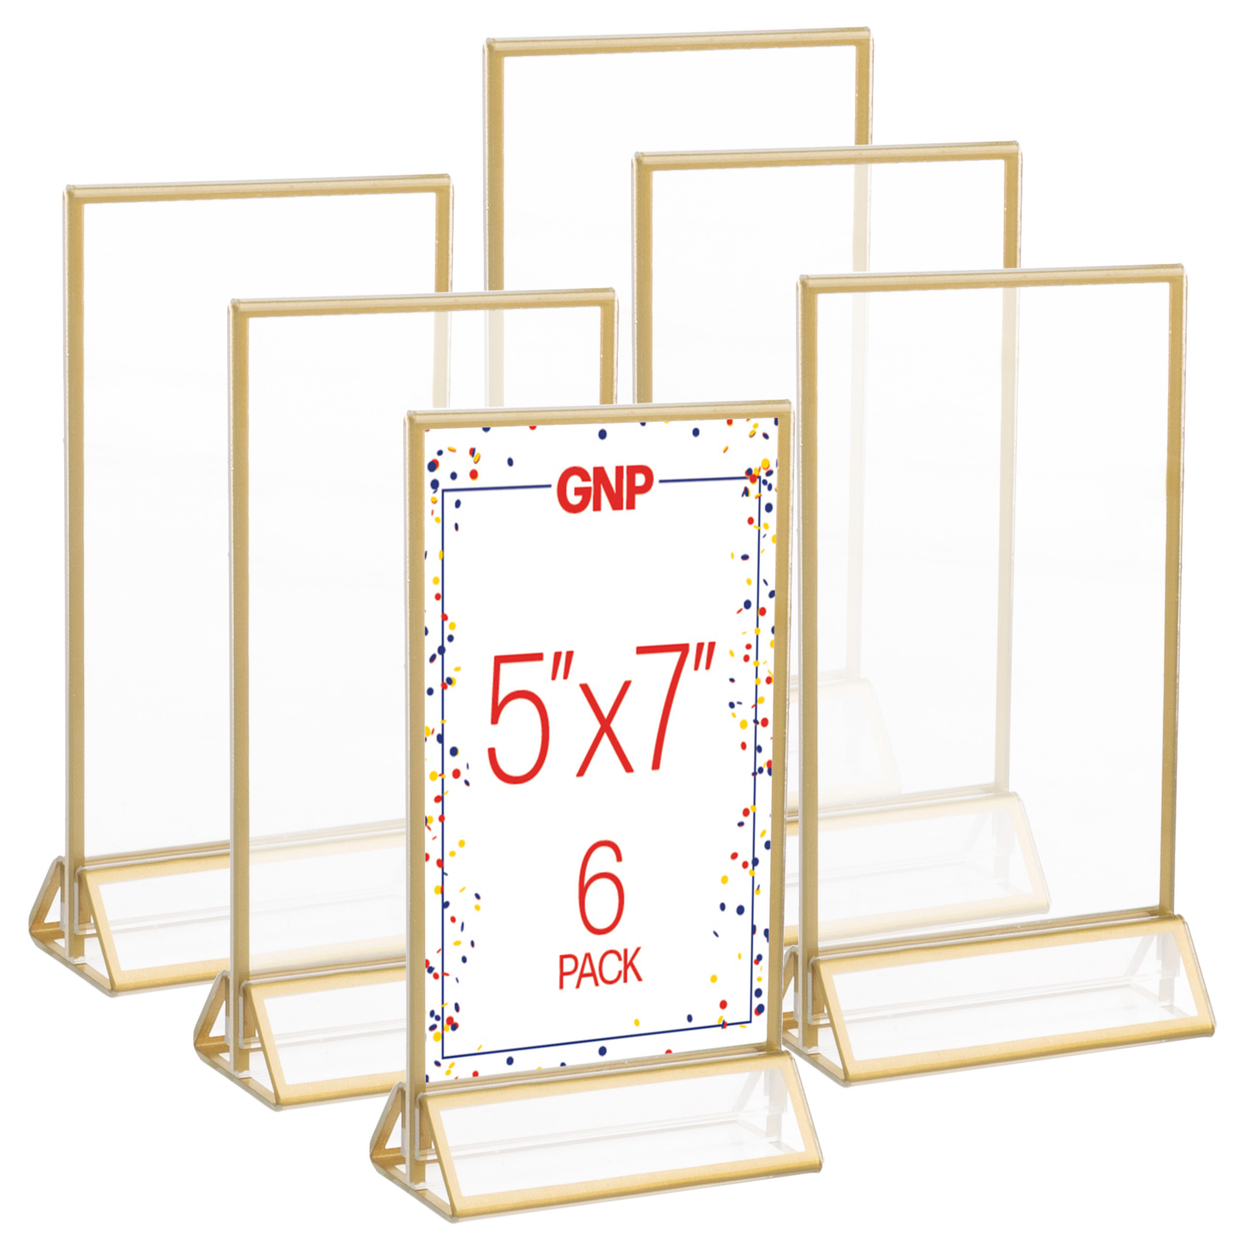 6 Pack Table Frame Set Photos Signs Dcor Fits 5 X 7 Images